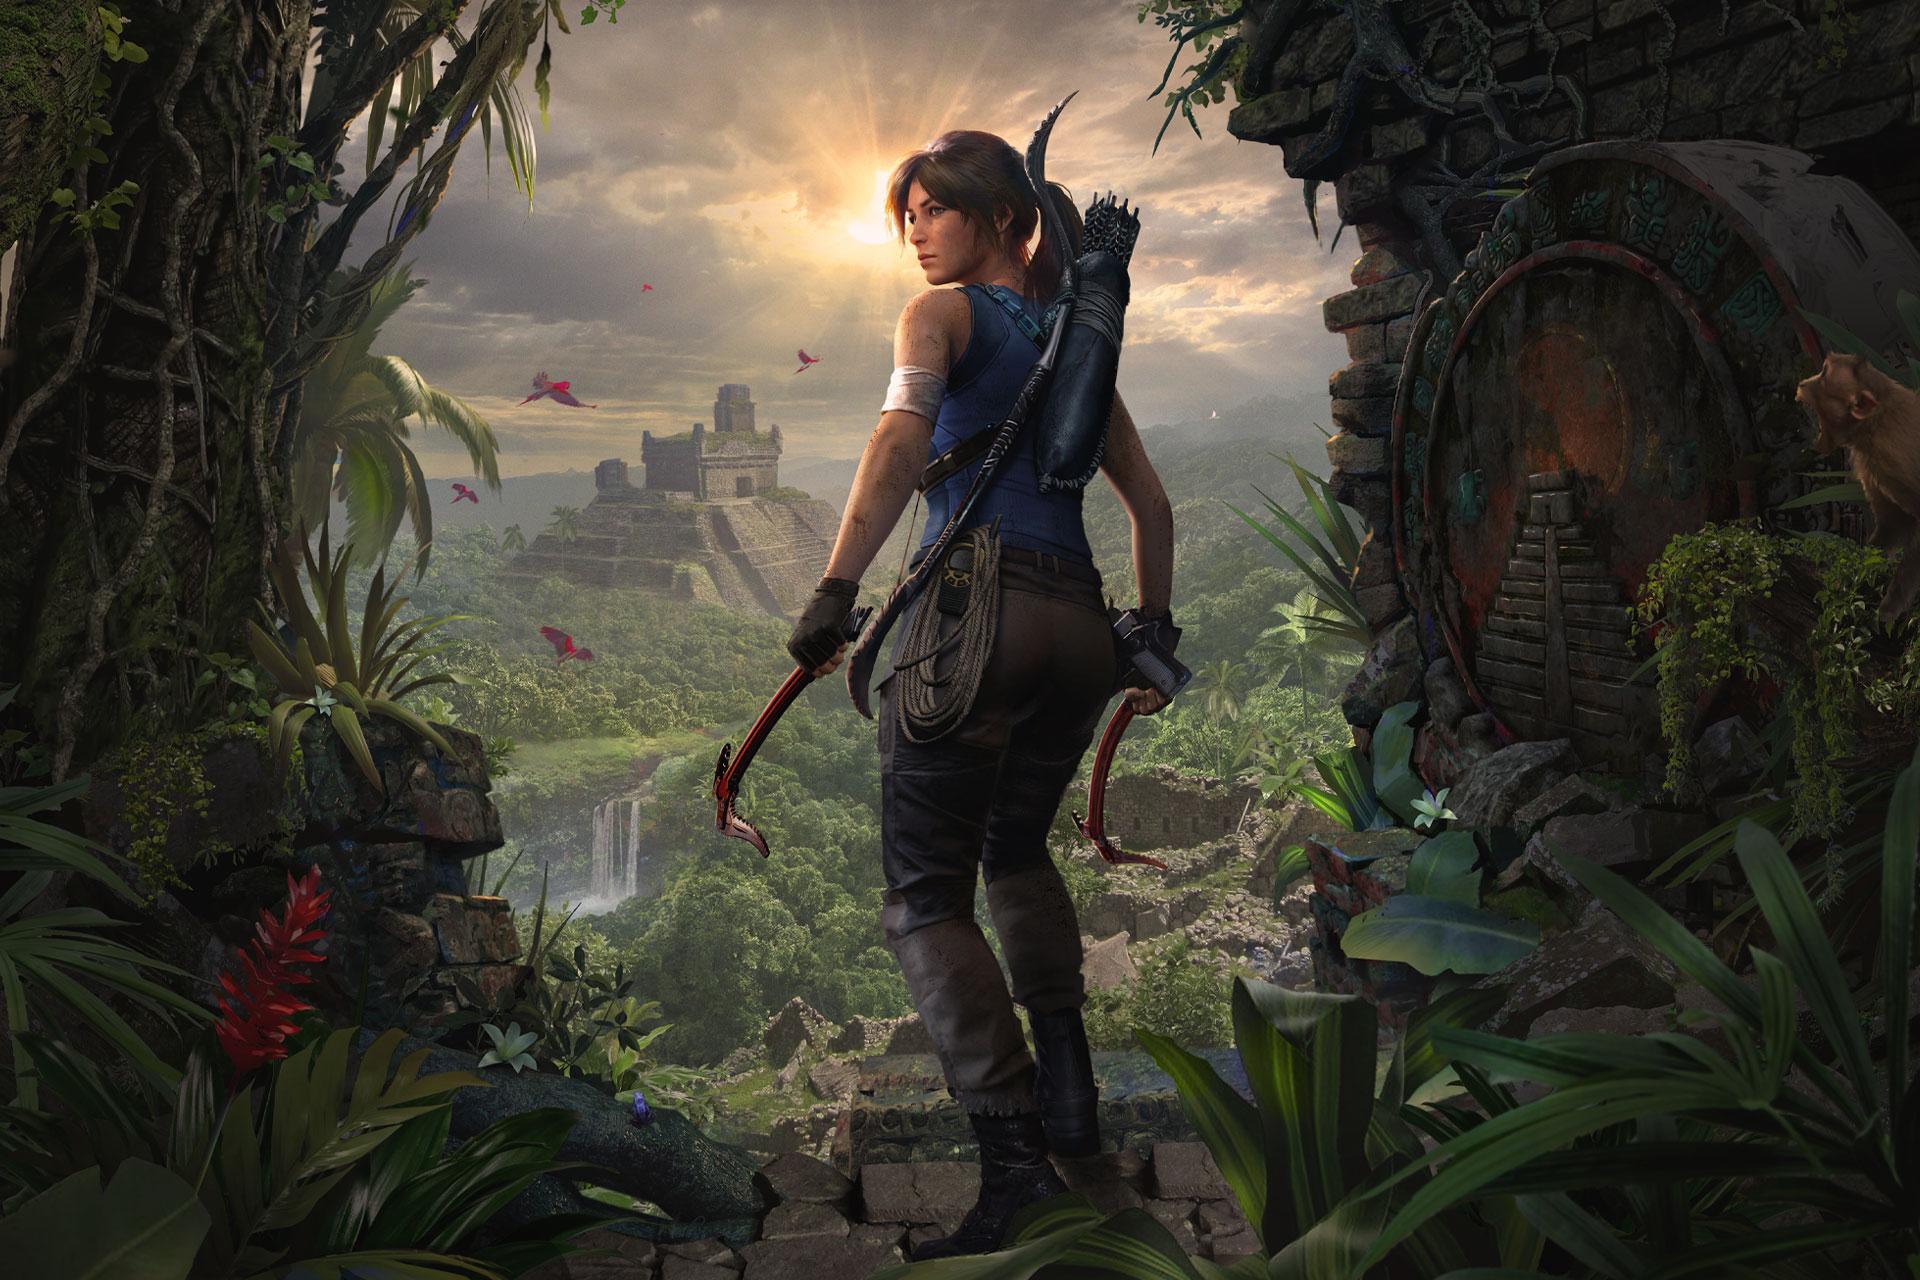 Lara Croft standing in a jungle with an ancient city in the background.